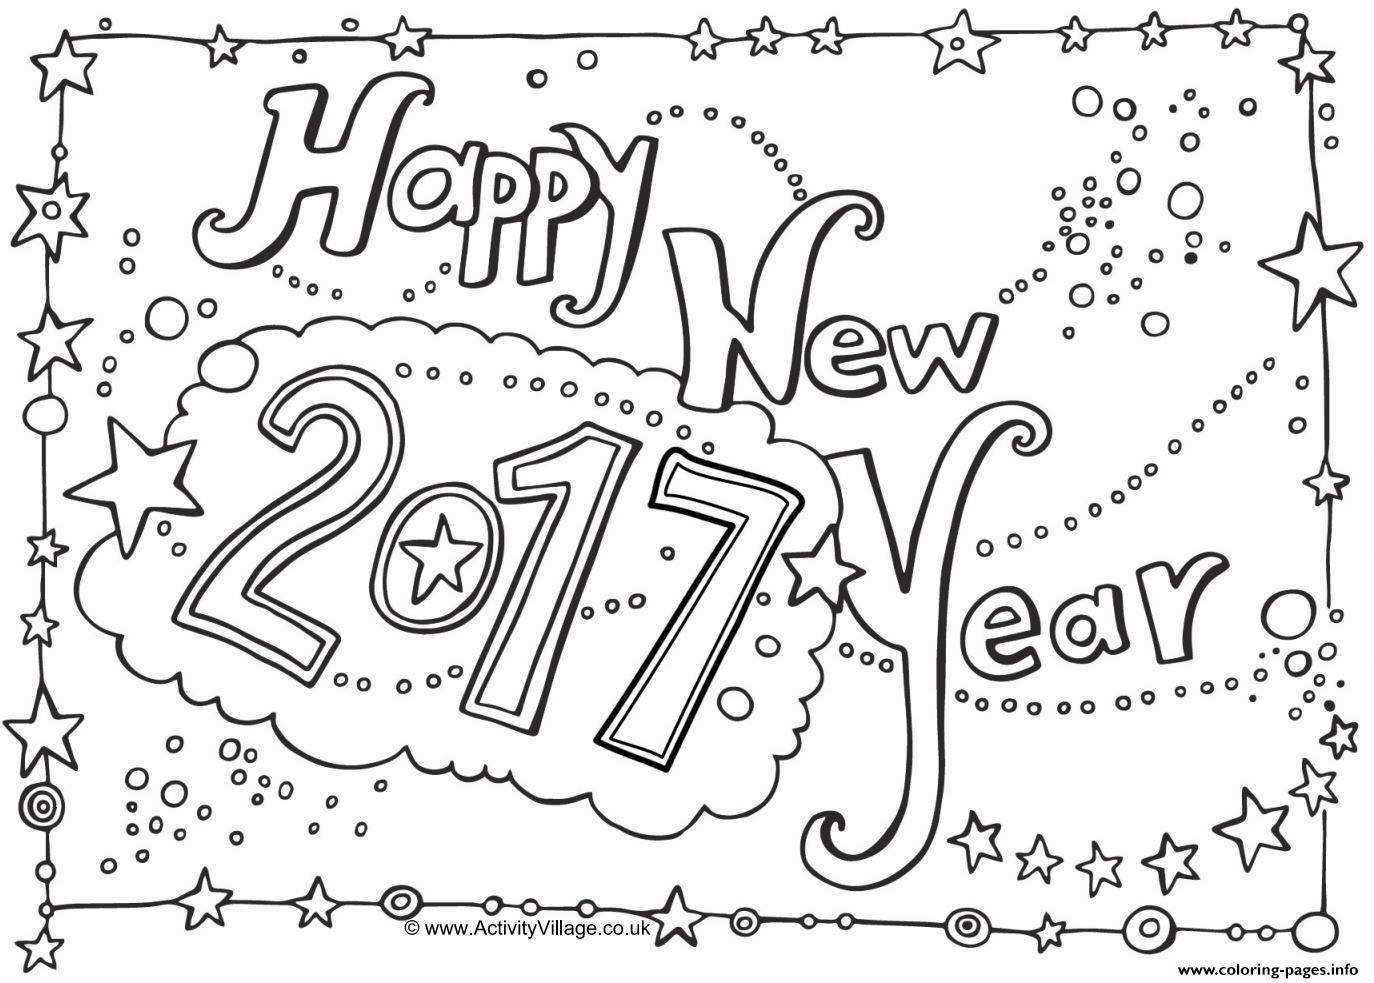 Happy New Year 2017 coloring pages